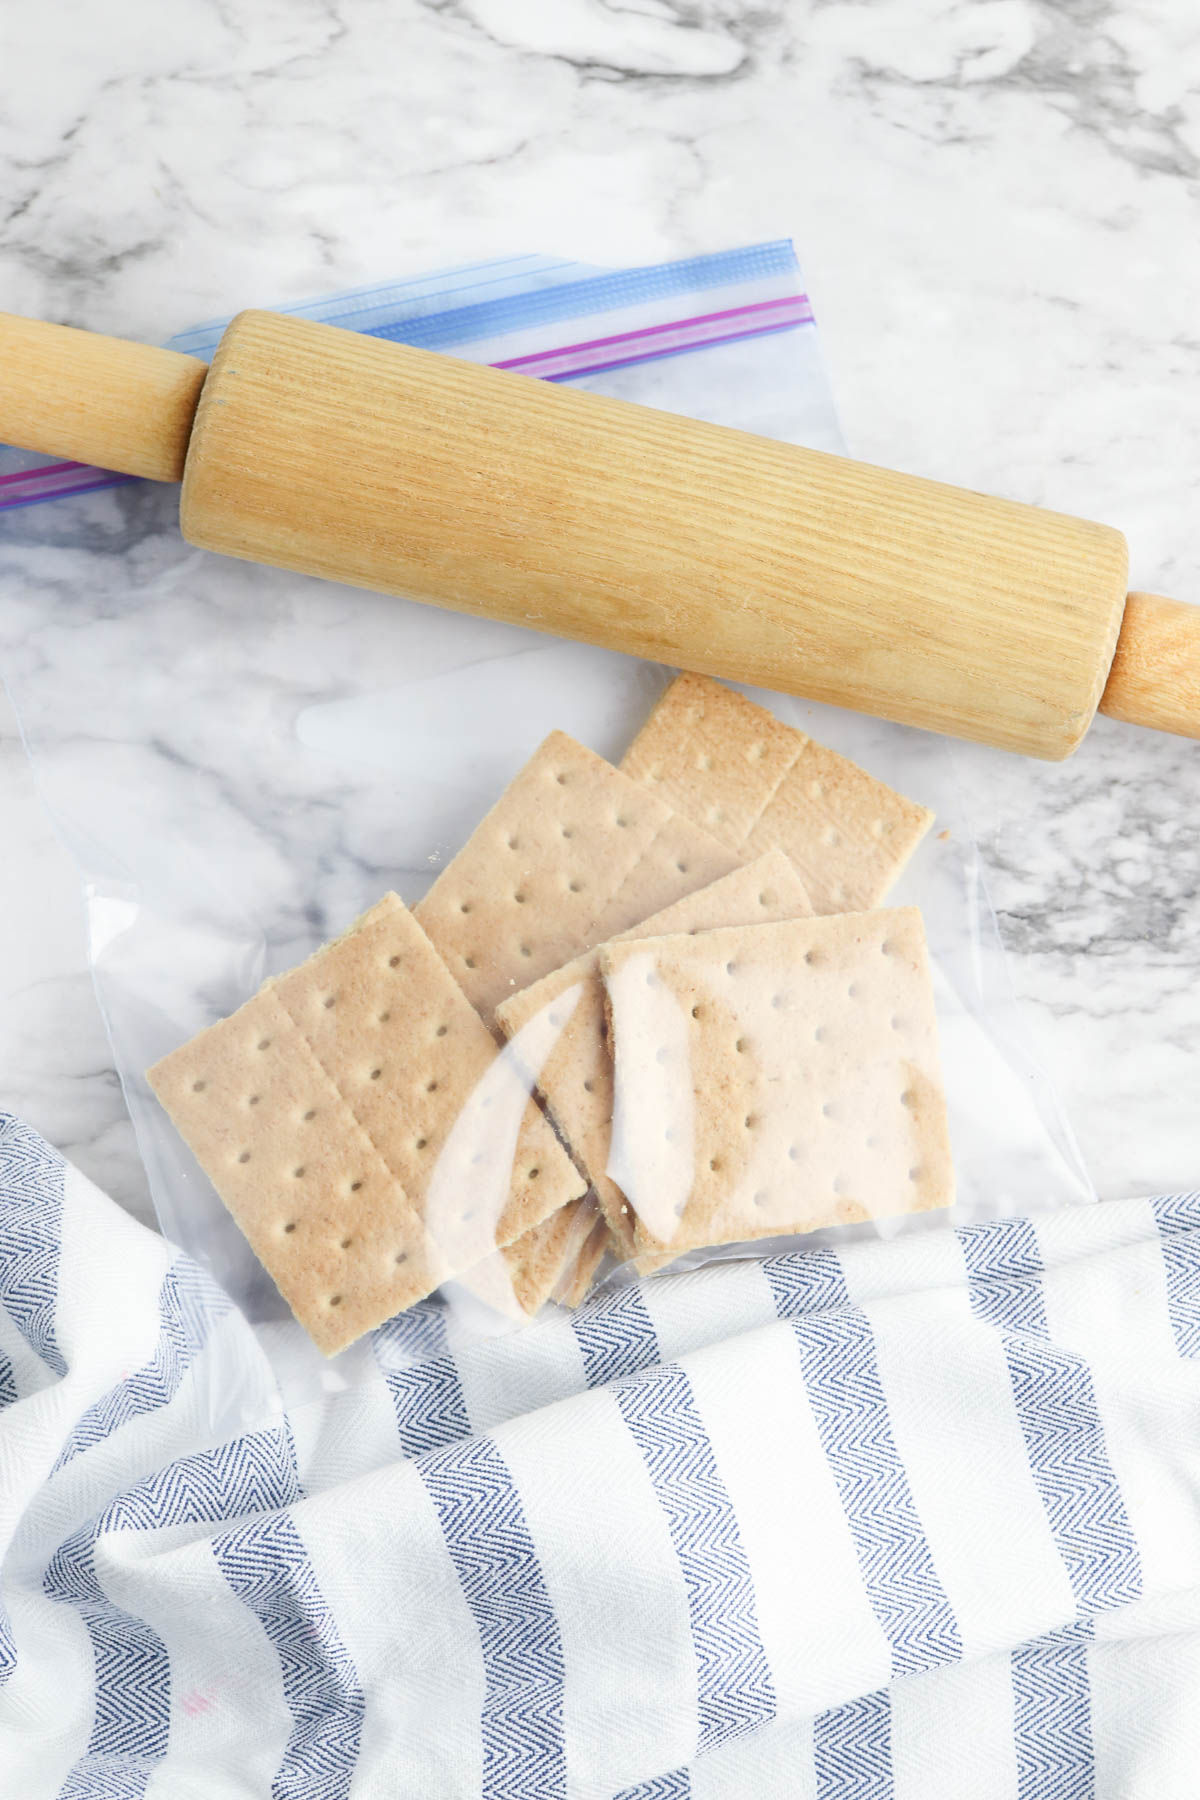 Graham crackers in plastic bag next to rolling pin